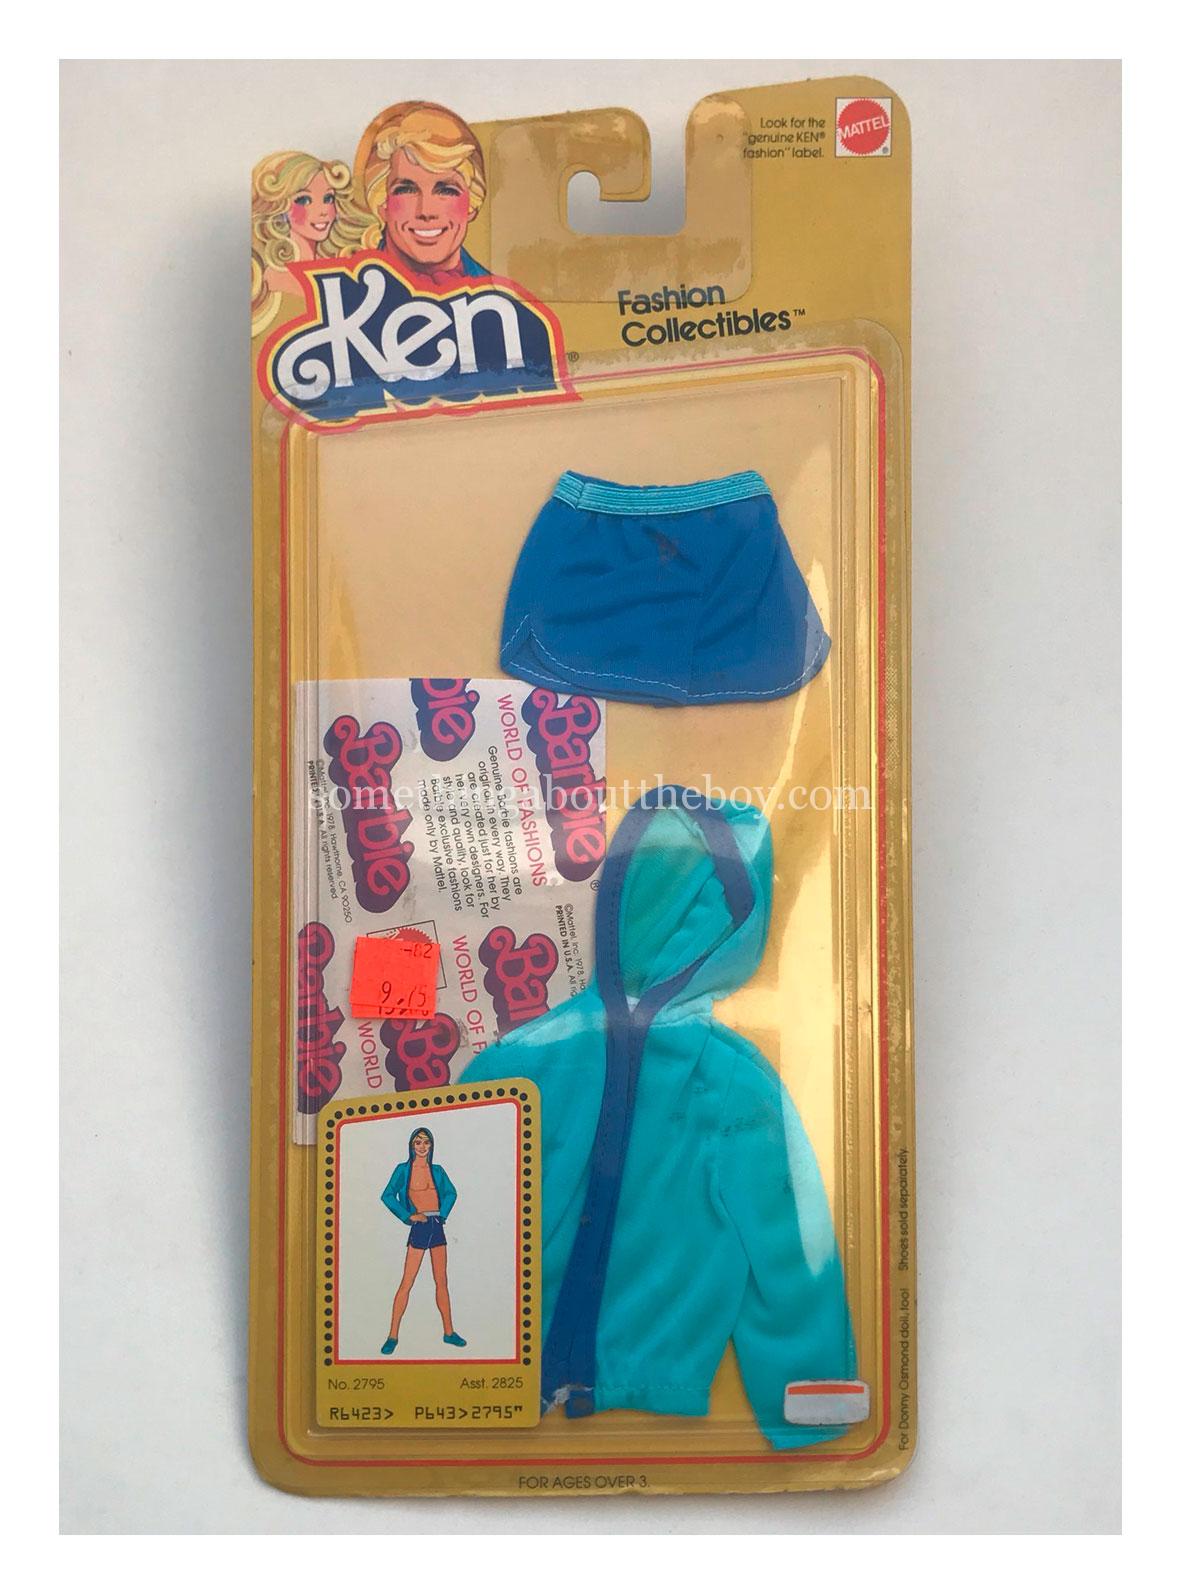 1979 Fashion Collectibles #2795 in original packaging